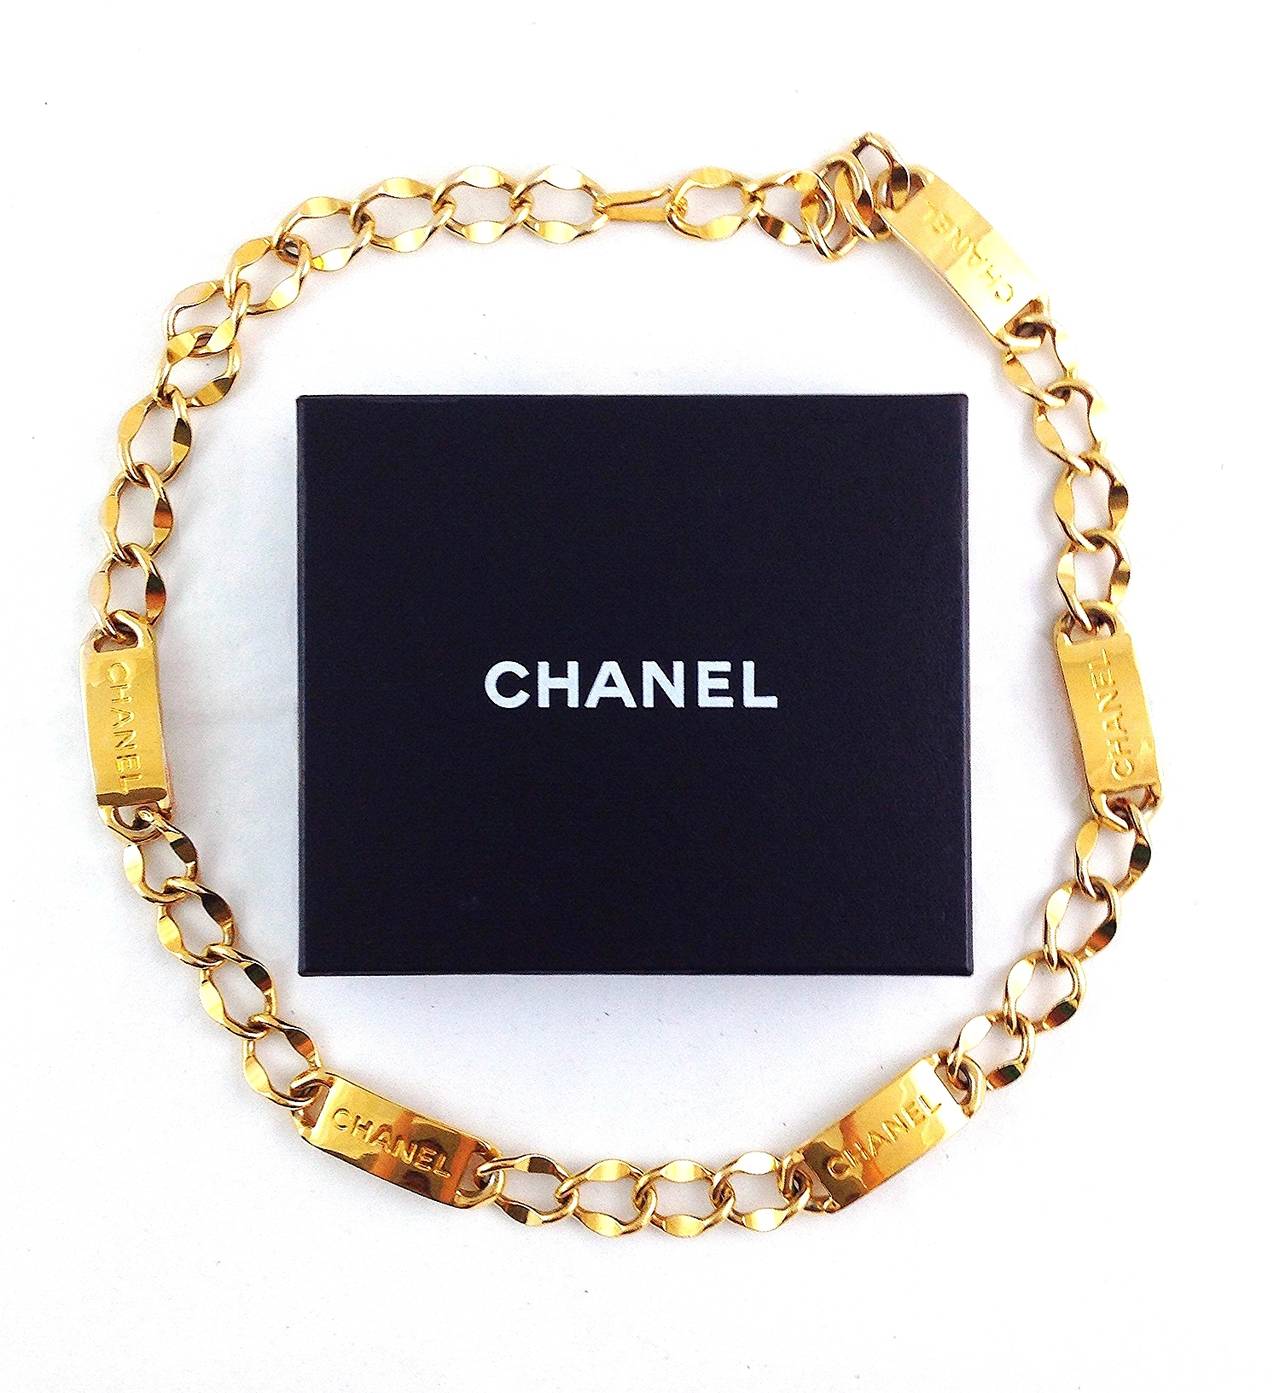 Iconic Chanel gold-tone chain necklace with five Chanel ID plaques and hook closure. Can also be worn as a belt. Comes with box, circa 1980s.

Approxmately 30